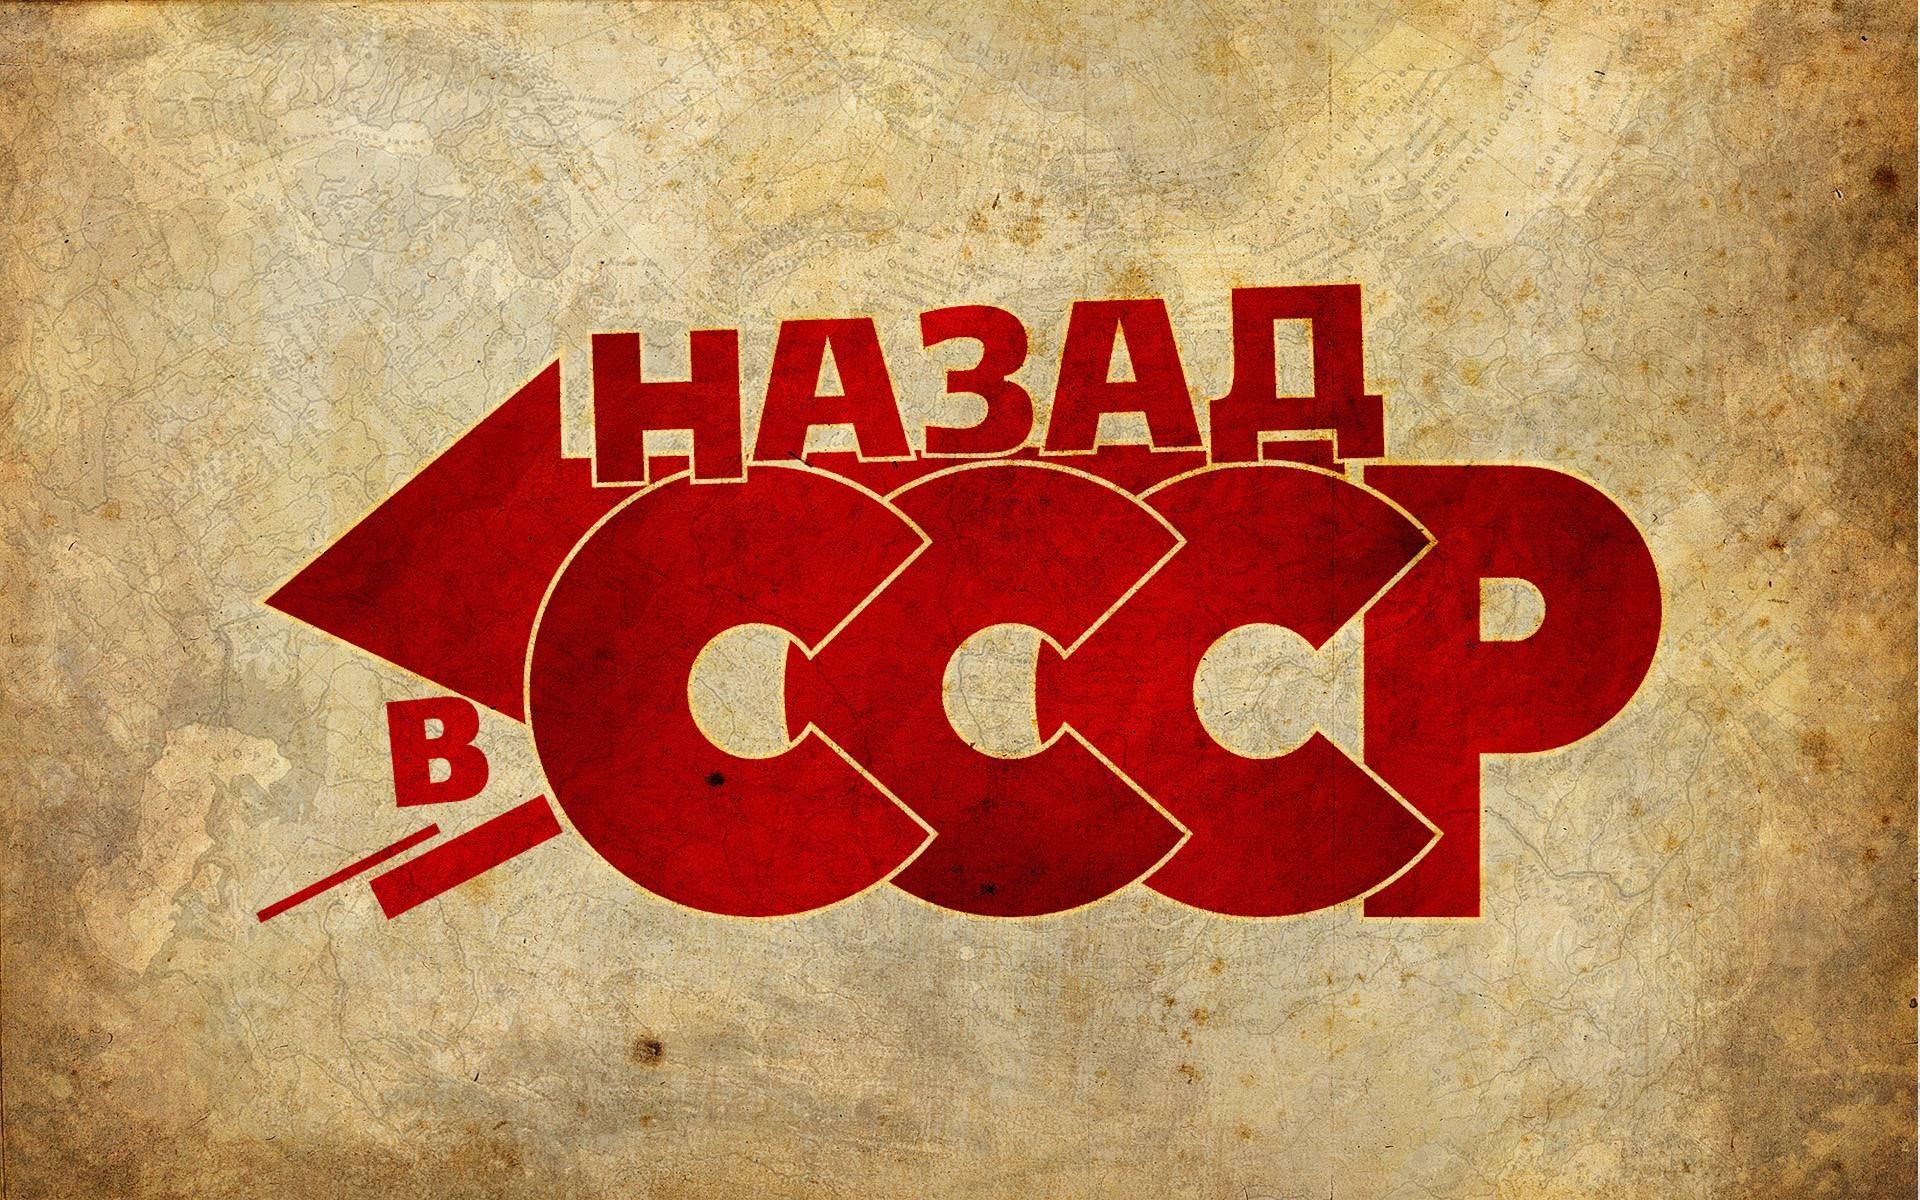 Soviet Union Wallpaper Source - Back In The Ussr , HD Wallpaper & Backgrounds